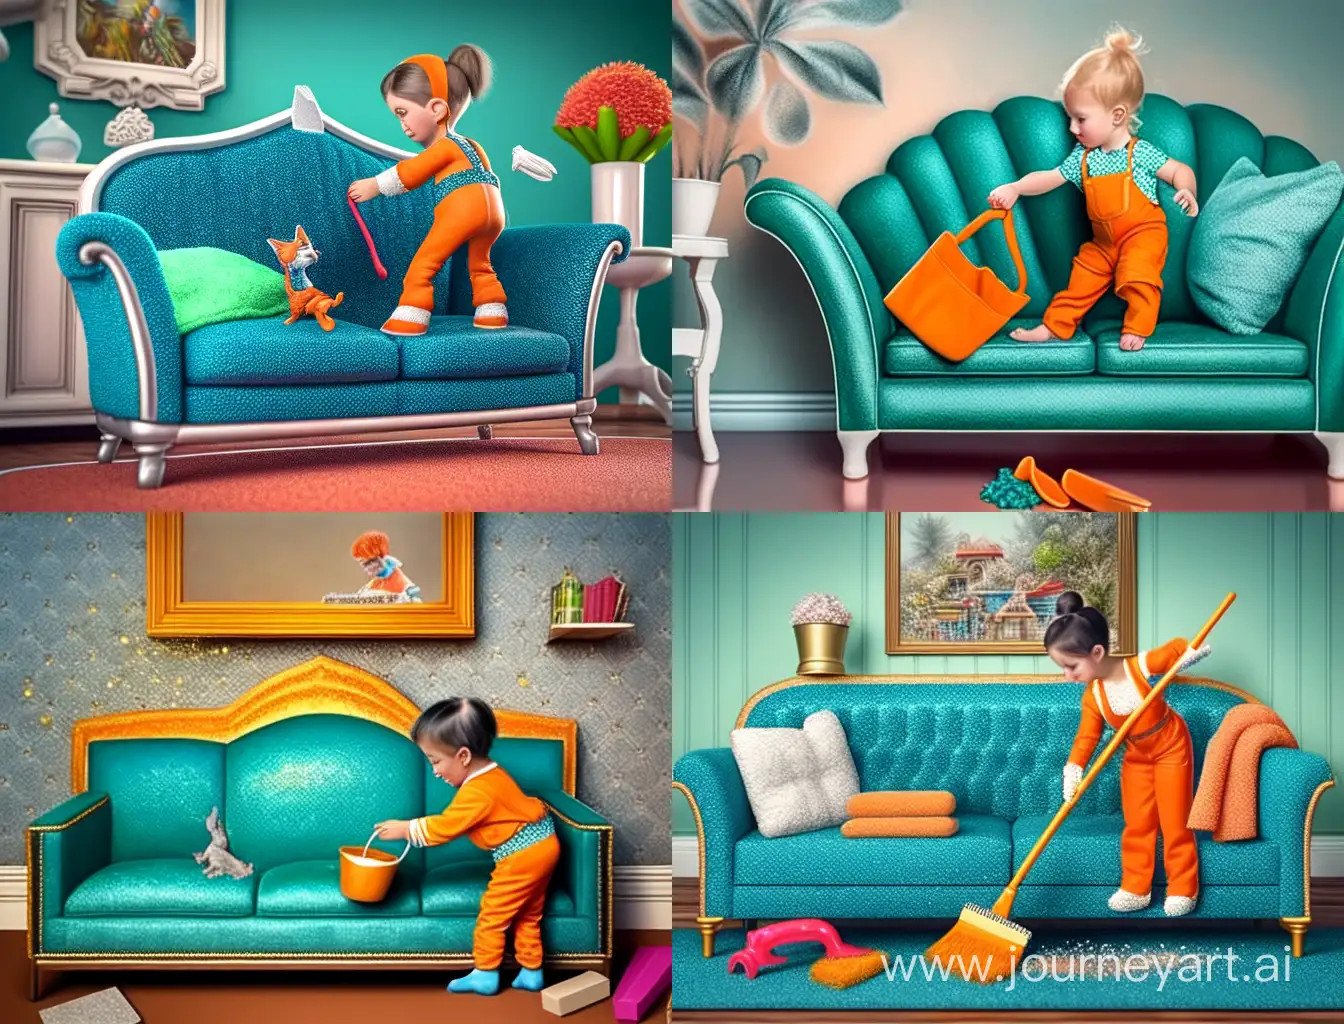 Turquoise-Jumpsuit-Elf-Cleaning-an-Orange-Sofa-HyperRealistic-3D-Digital-Painting